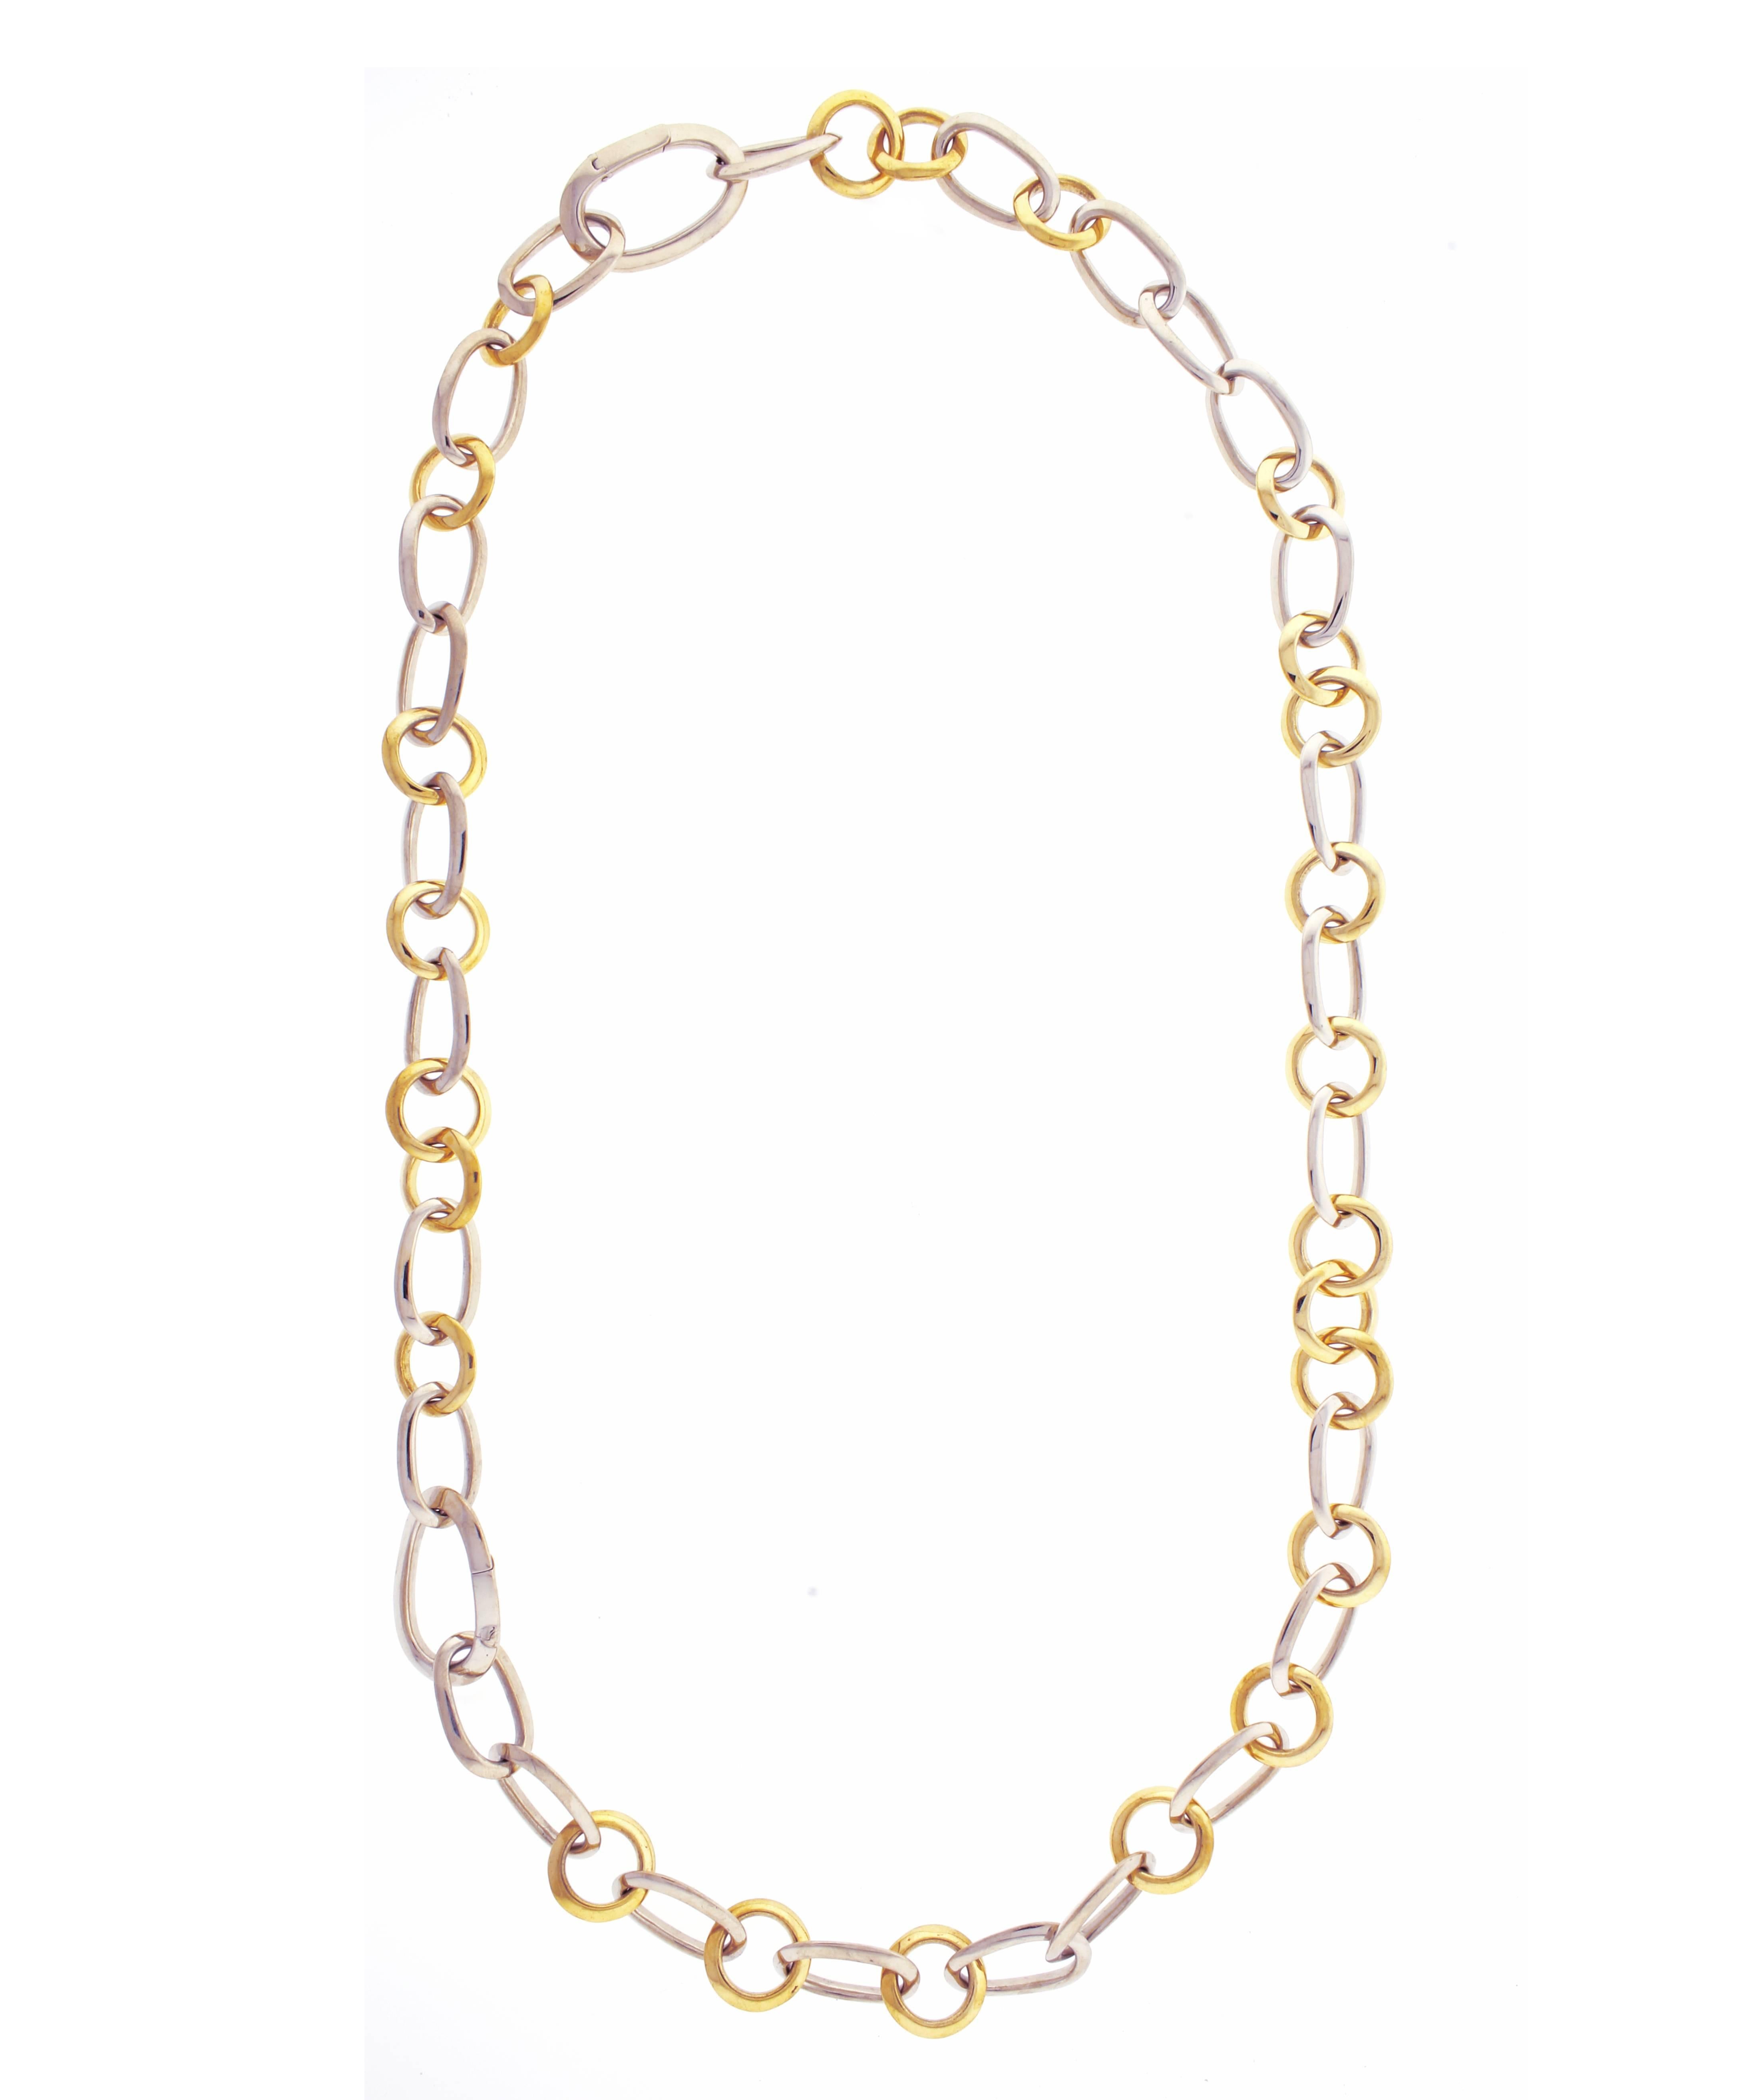 Pomellato yellow and white 18 karat gold link necklace, composed of oval-shaped knife-edge style links in 18 karat white gold and circular-shaped knife-edge style links in 18 karat yellow gold, with matching bracelet, the bracelet can be attached to